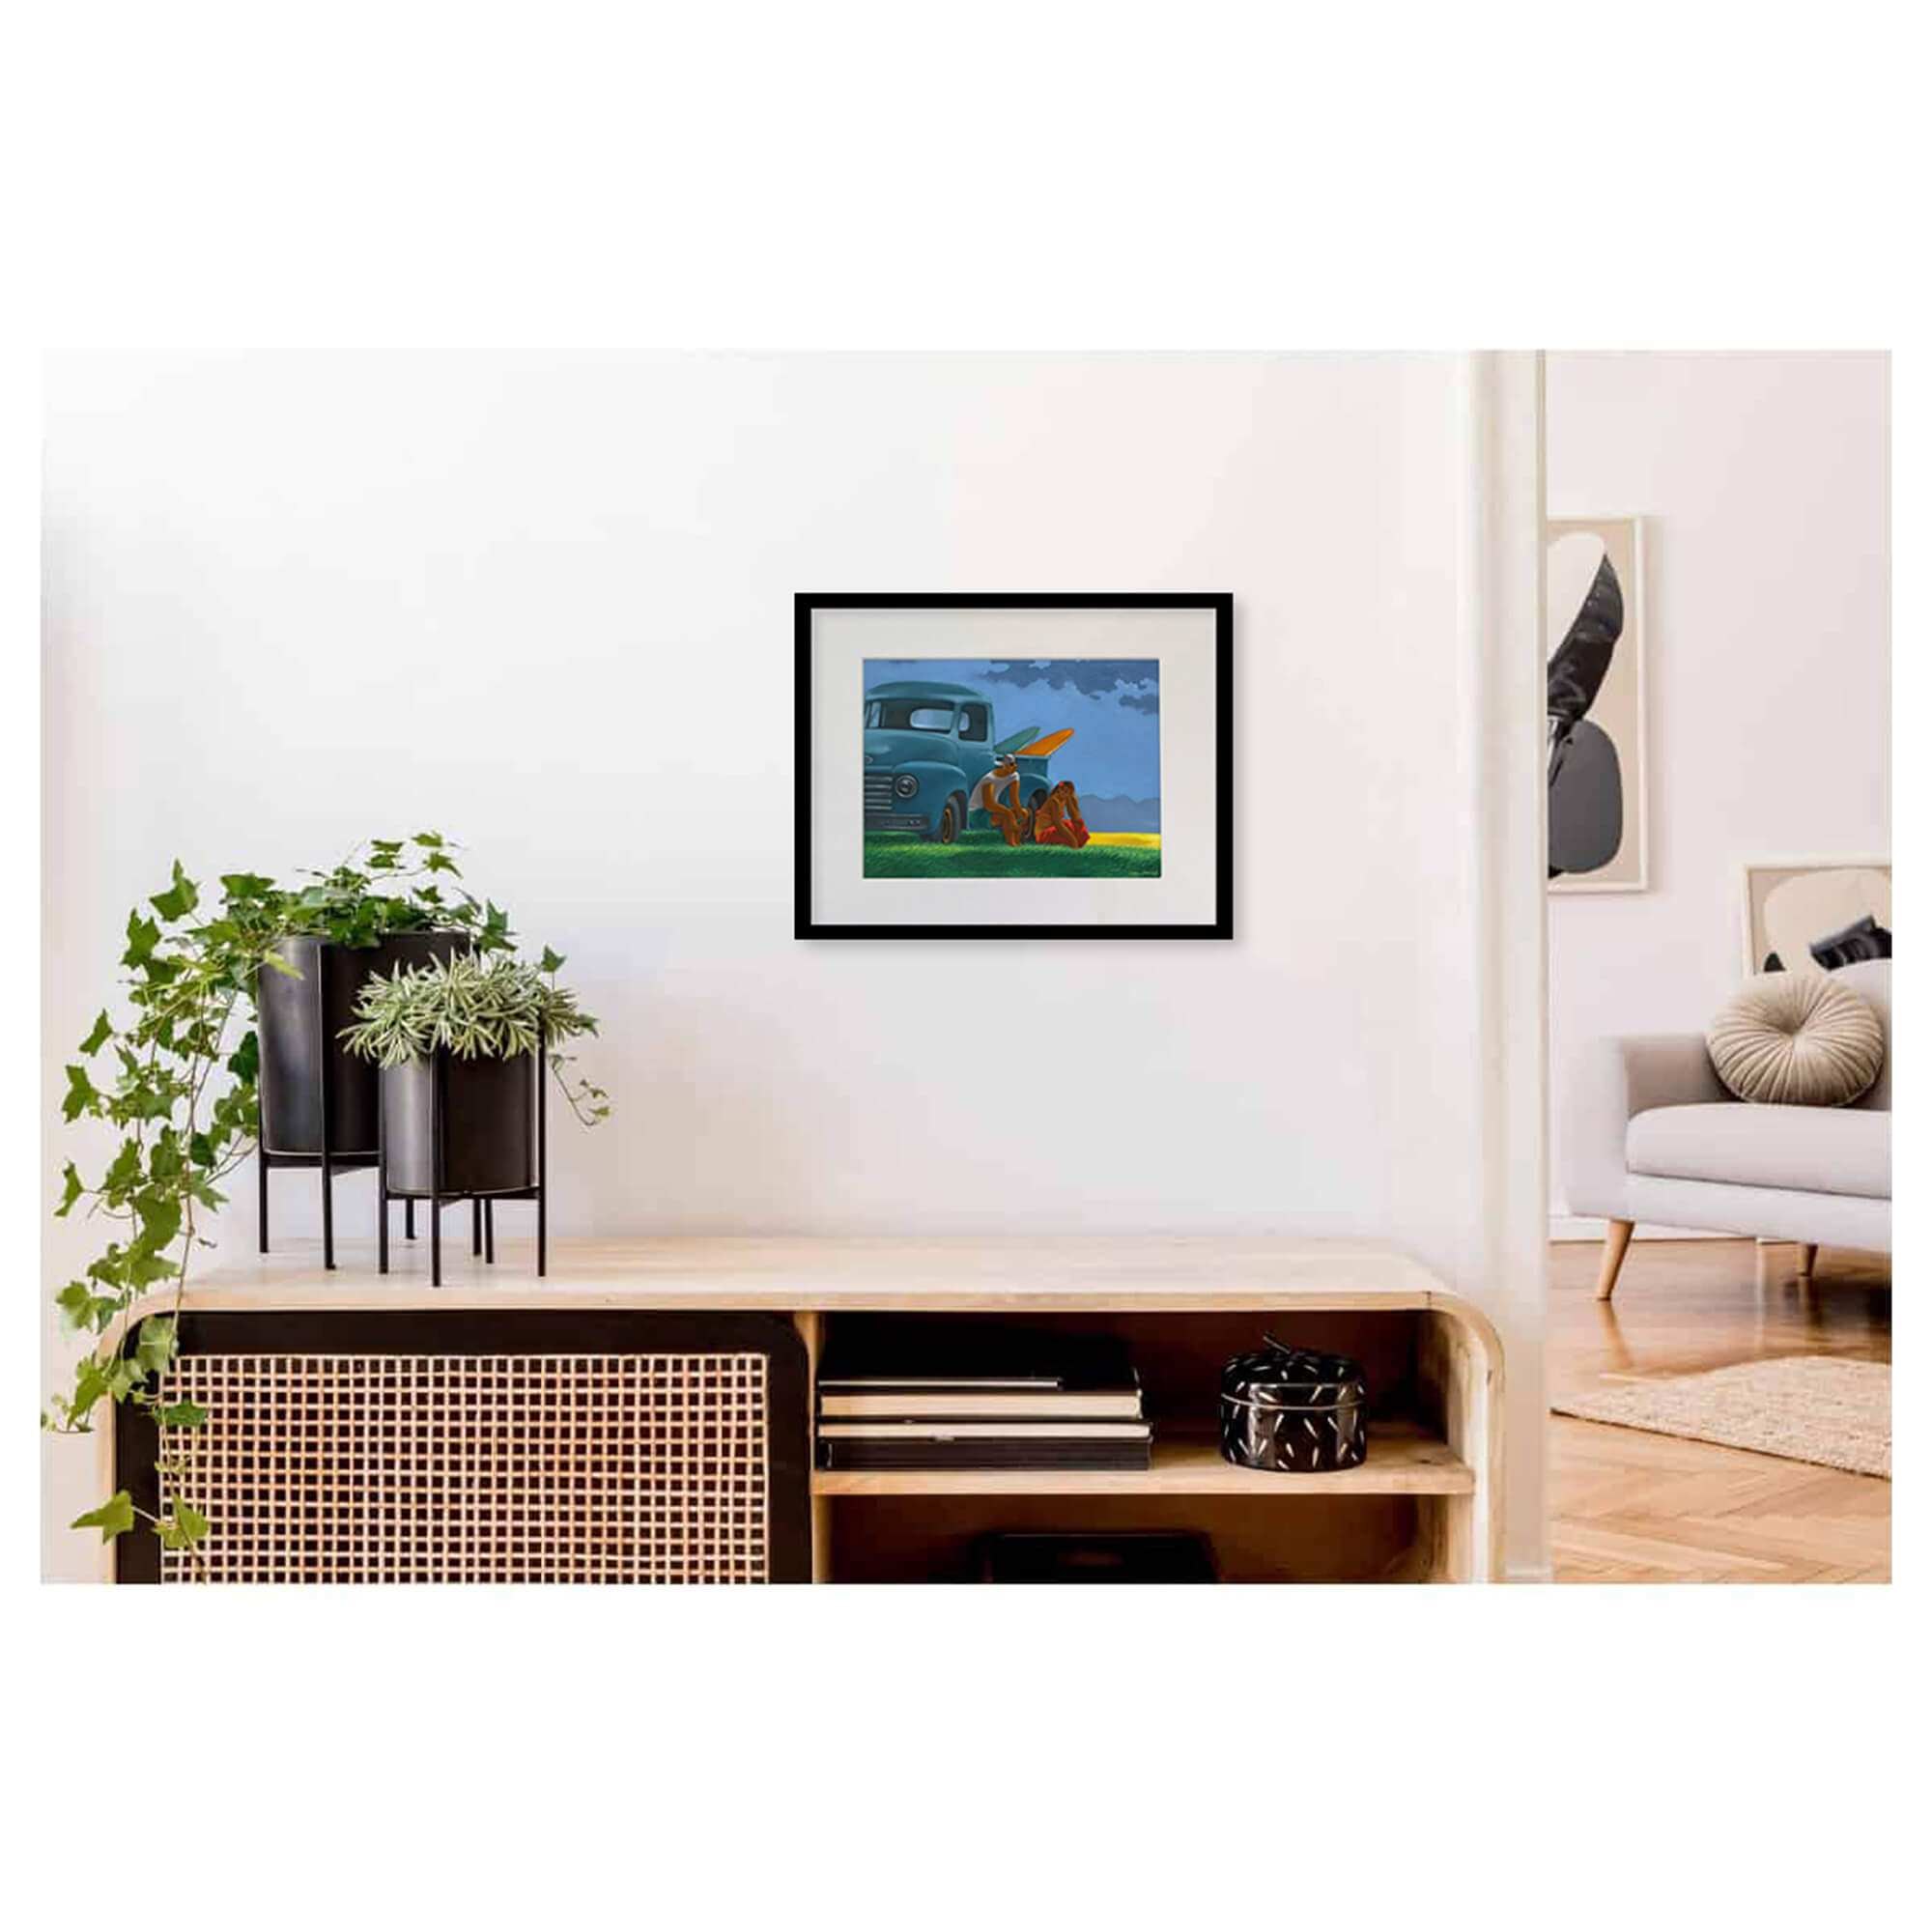 Framed matted art print of a couple with their surfboards and vintage truck by Hawaii artist Tim Nguyen